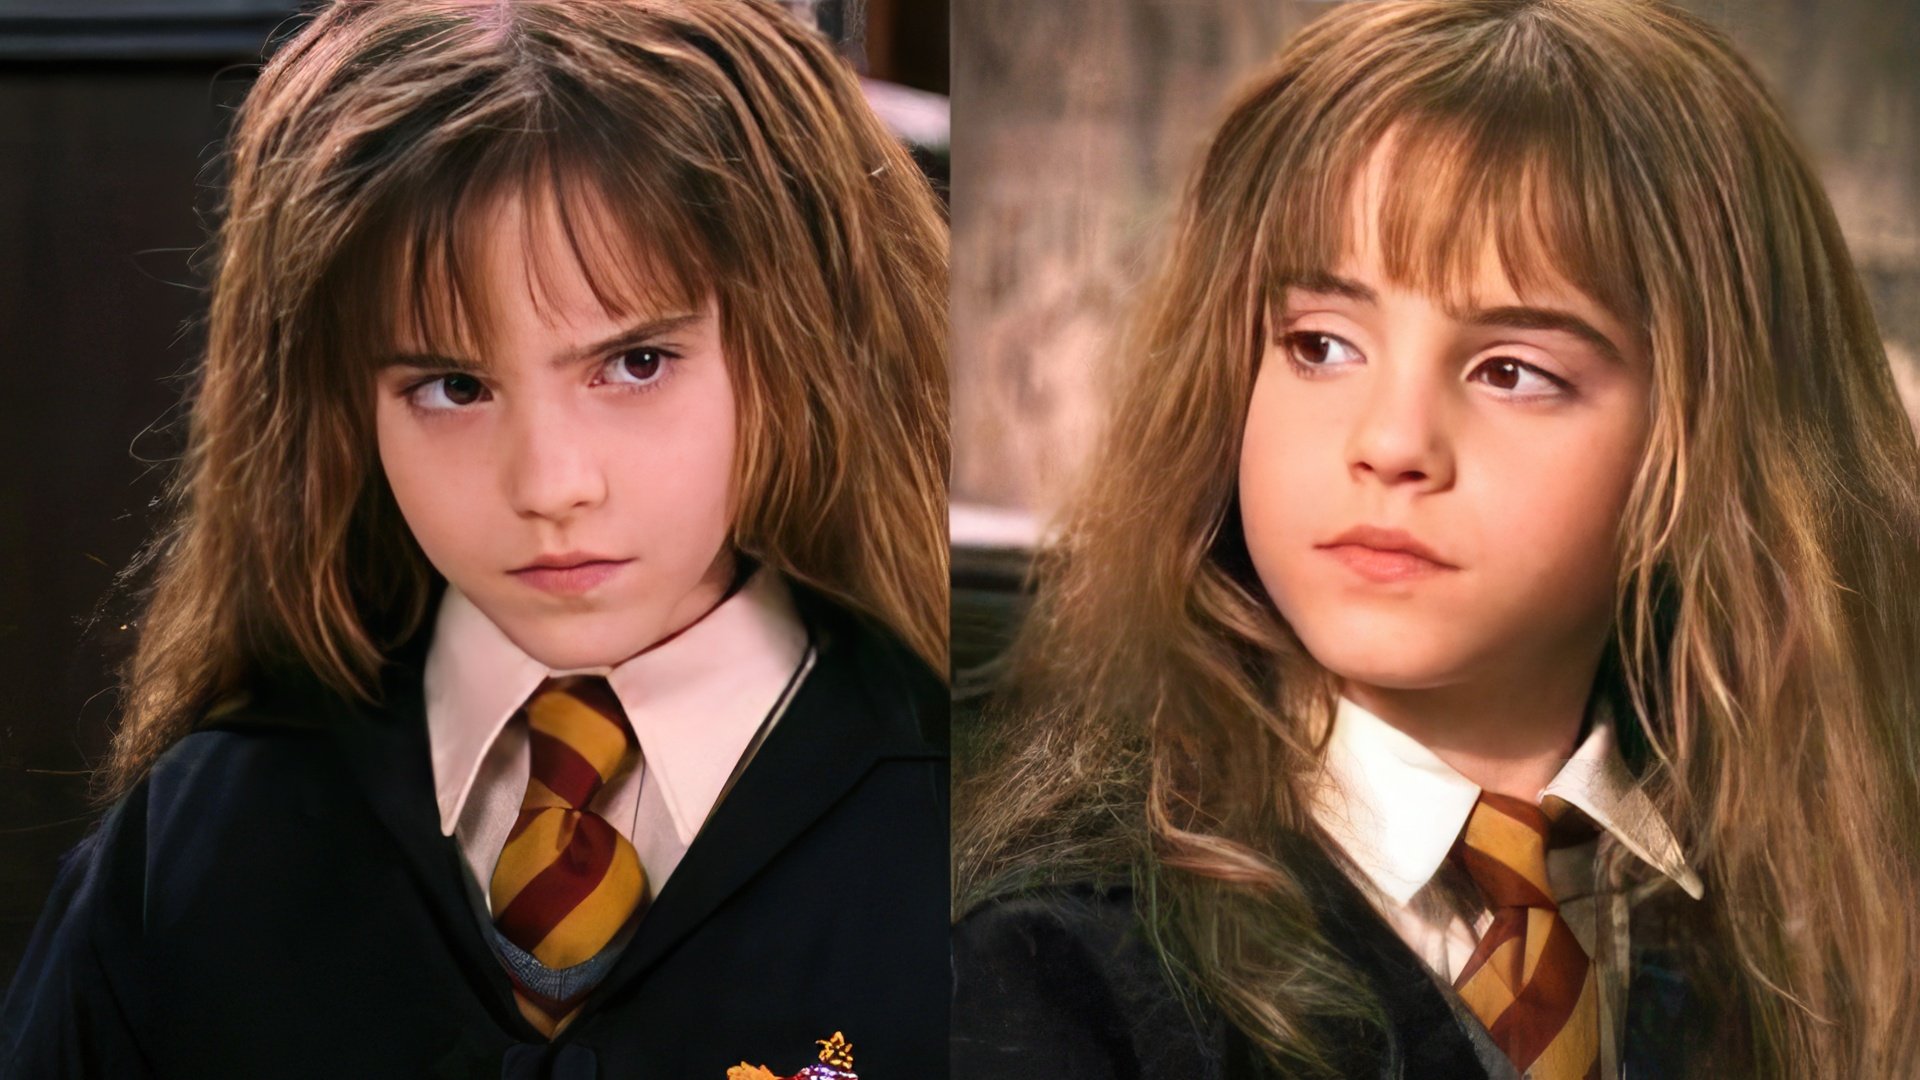 Young Hermione Granger charmed the audience